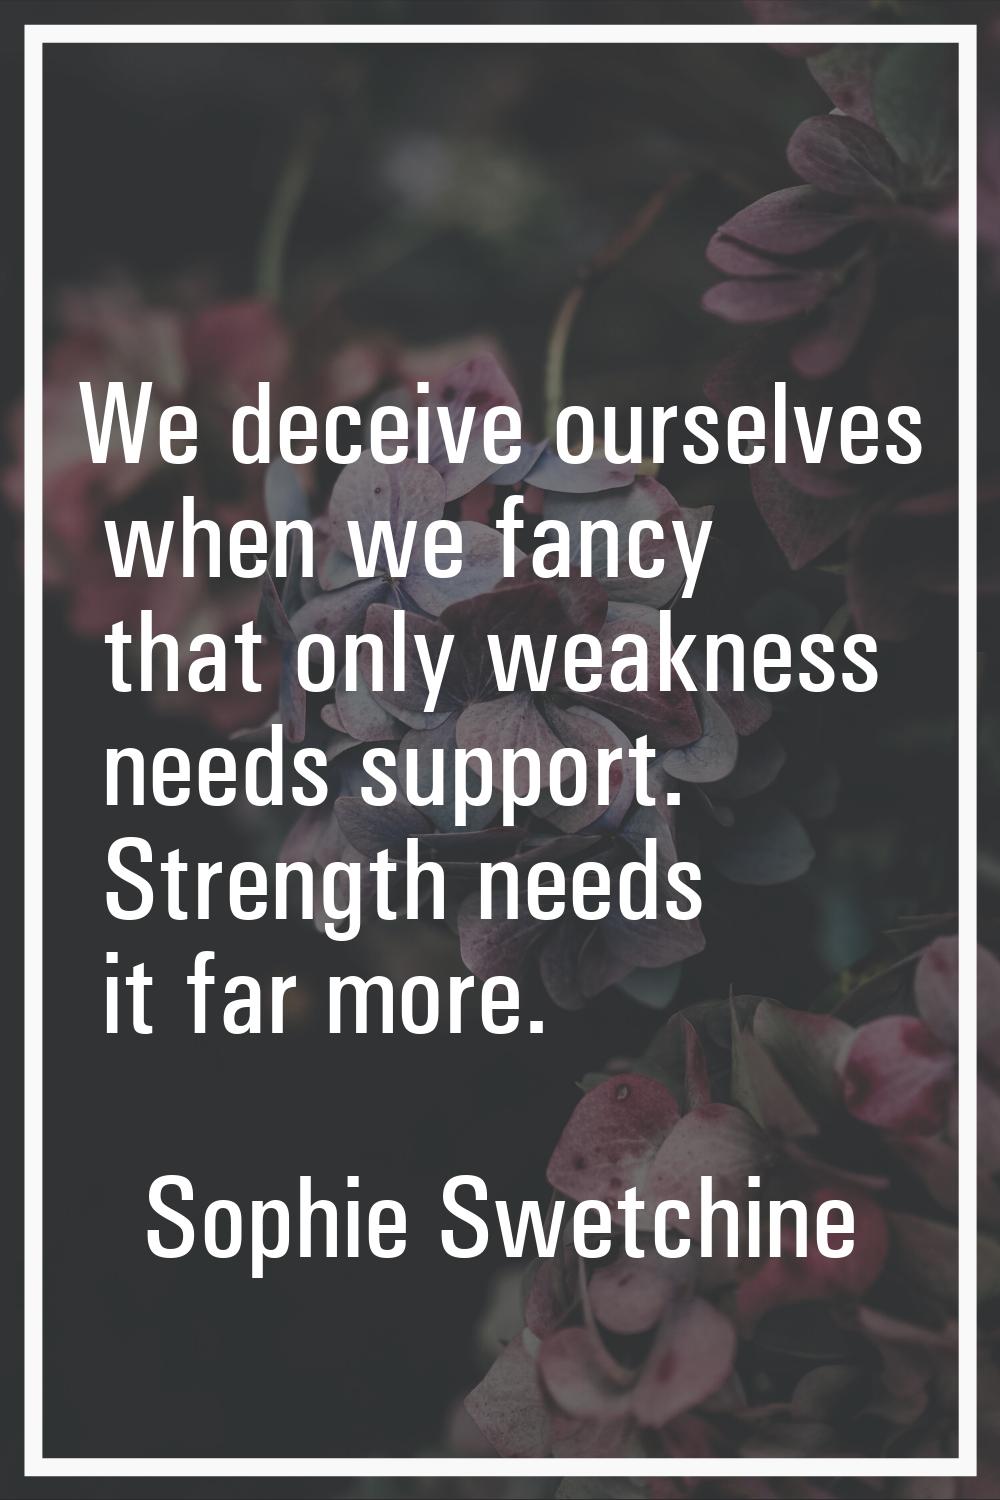 We deceive ourselves when we fancy that only weakness needs support. Strength needs it far more.